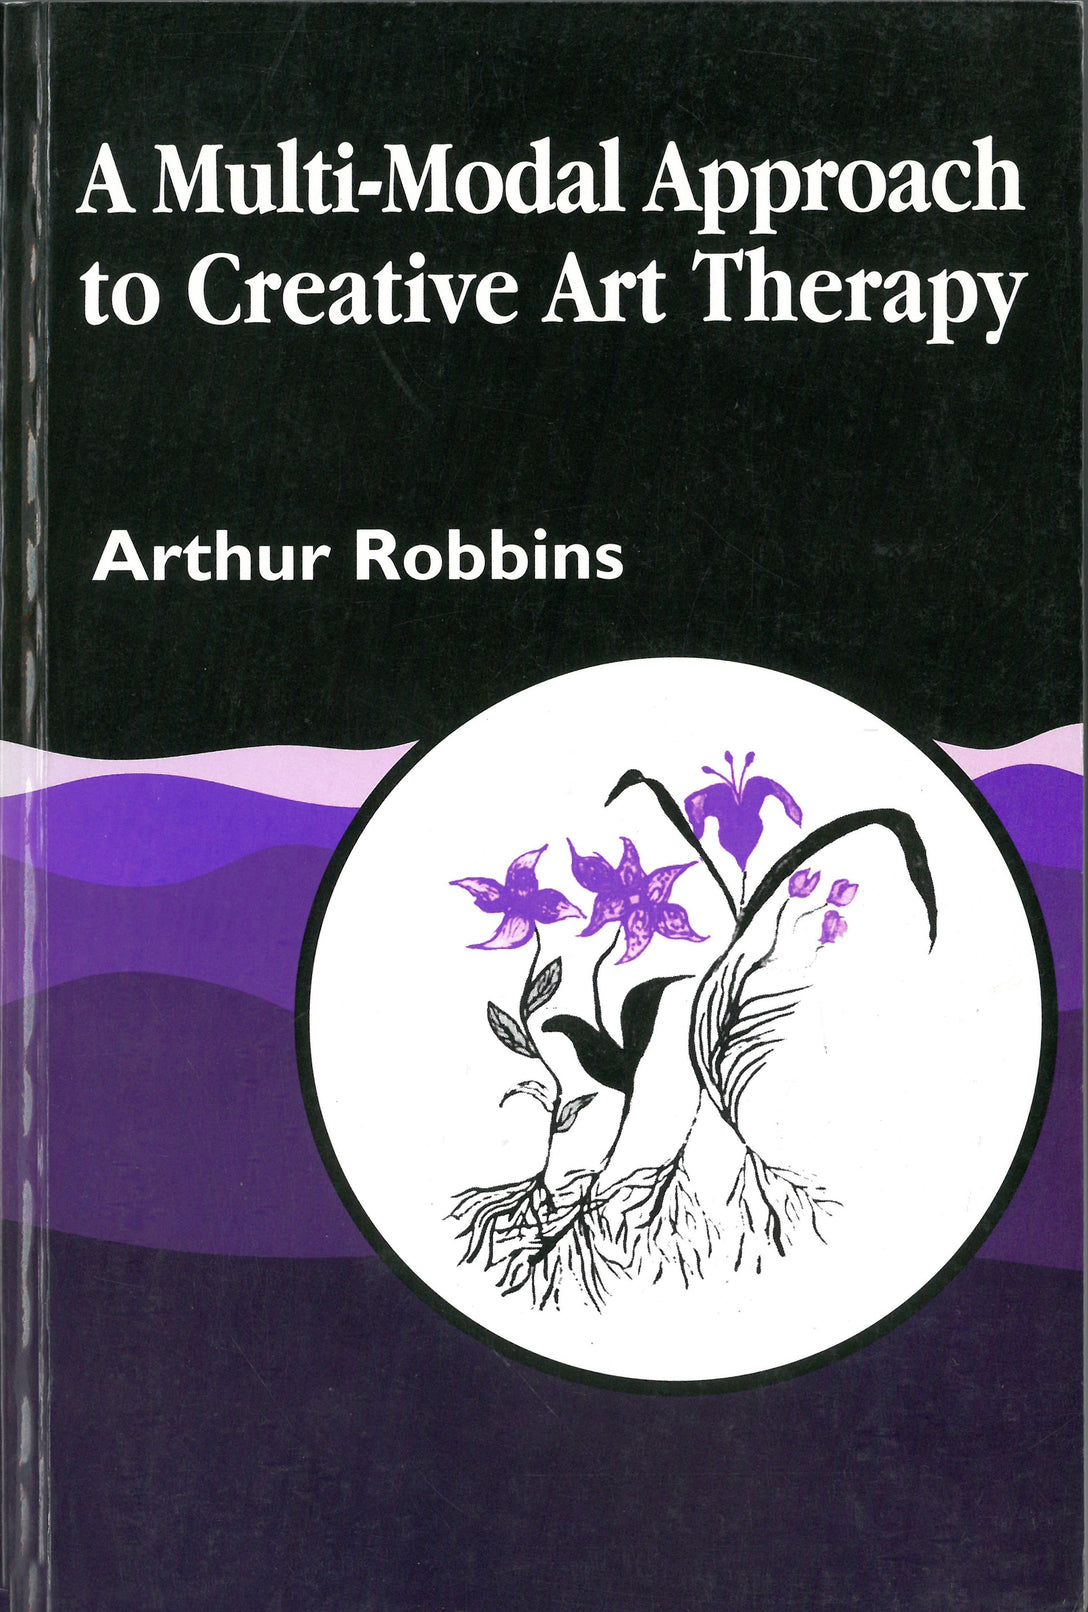 A Multi-Modal Approach to Creative Art Therapy by Arthur Robbins